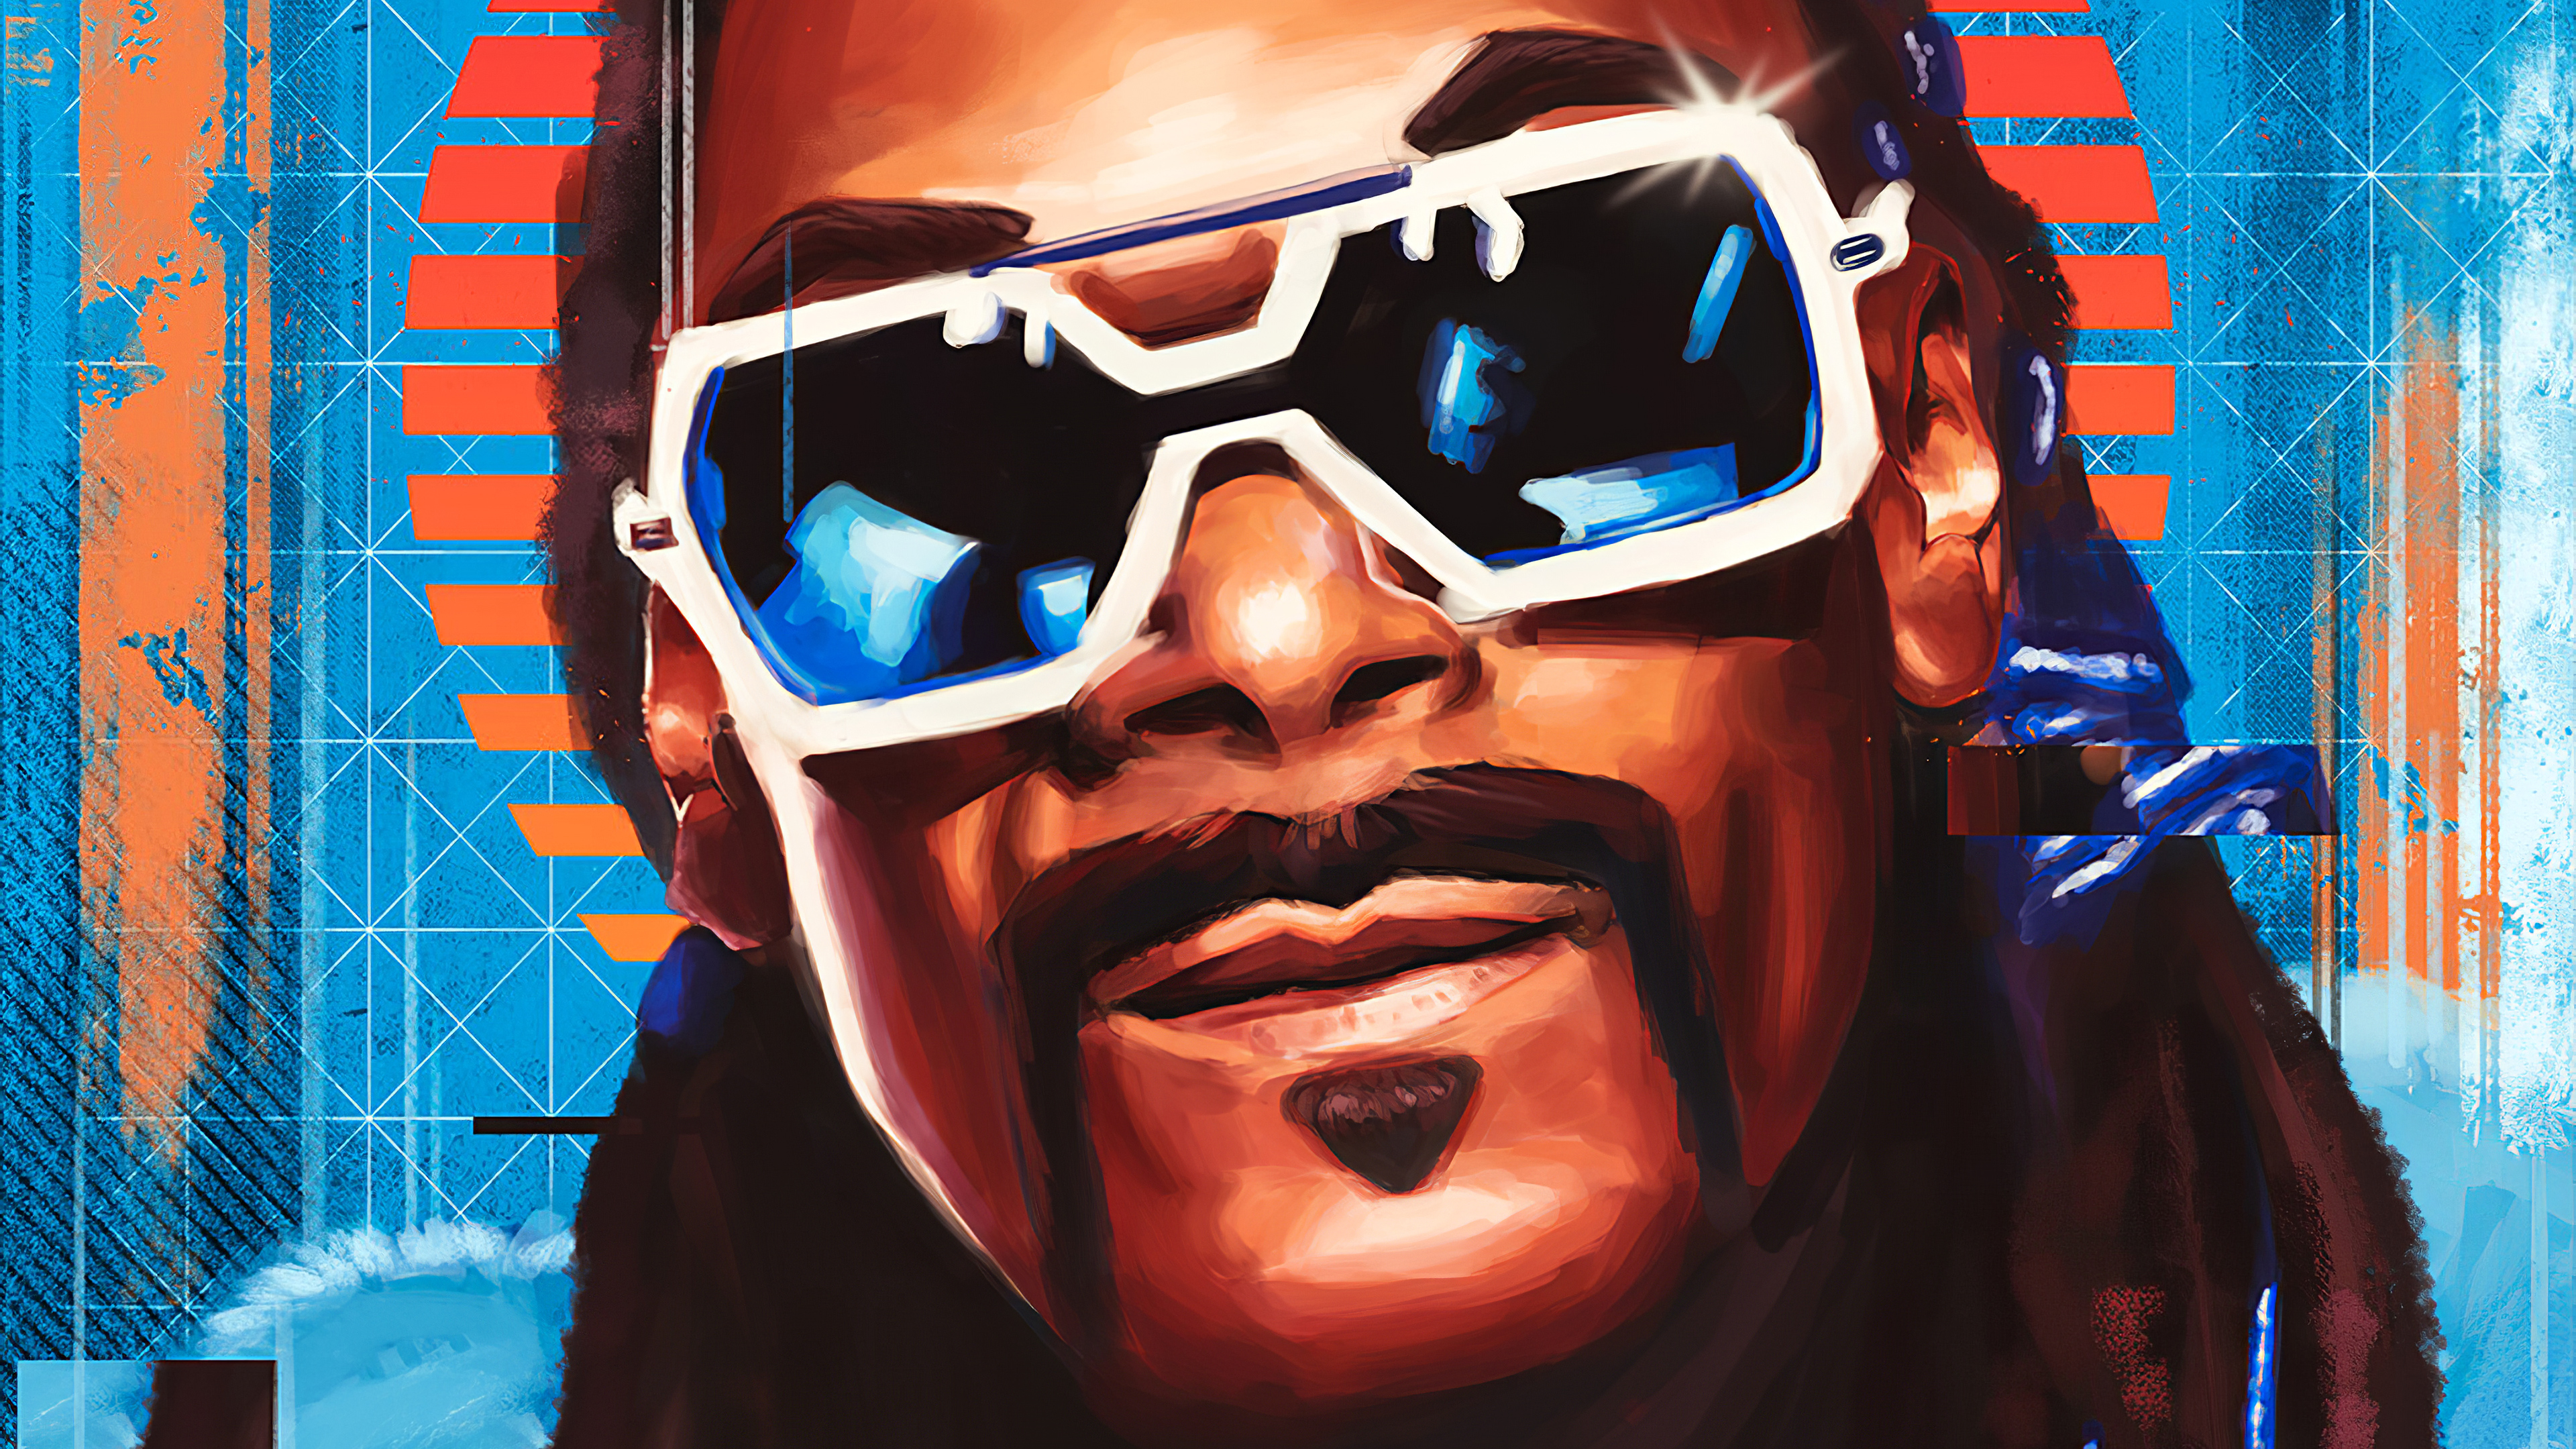 1600x1200 Snoop Dogg Digital Portrait Art 4k 1600x1200 Resolution HD 4k  Wallpapers, Images, Backgrounds, Photos and Pictures